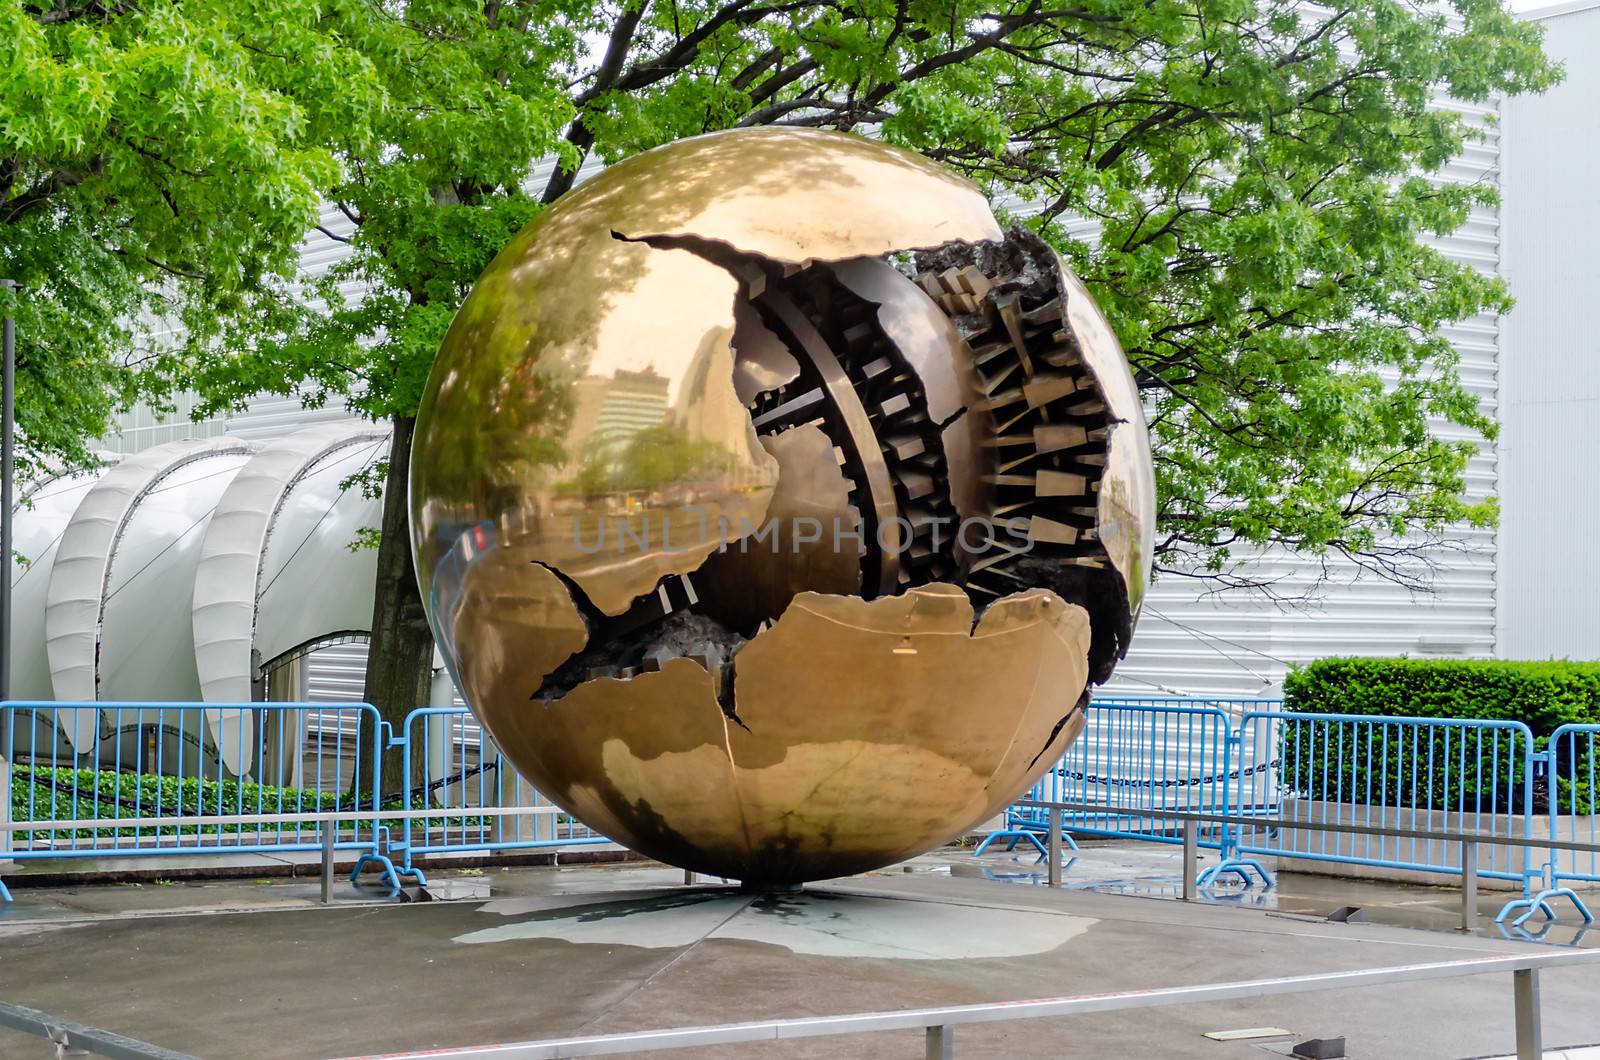 NEW YORK - MAY 28: One of the famous Sphere within Sphere bronze sculptures by A.Pomodoro outside United Nations Headquarters in New York, May 28, 2013. Other similar sculptures are in Vatican City and in Dublin